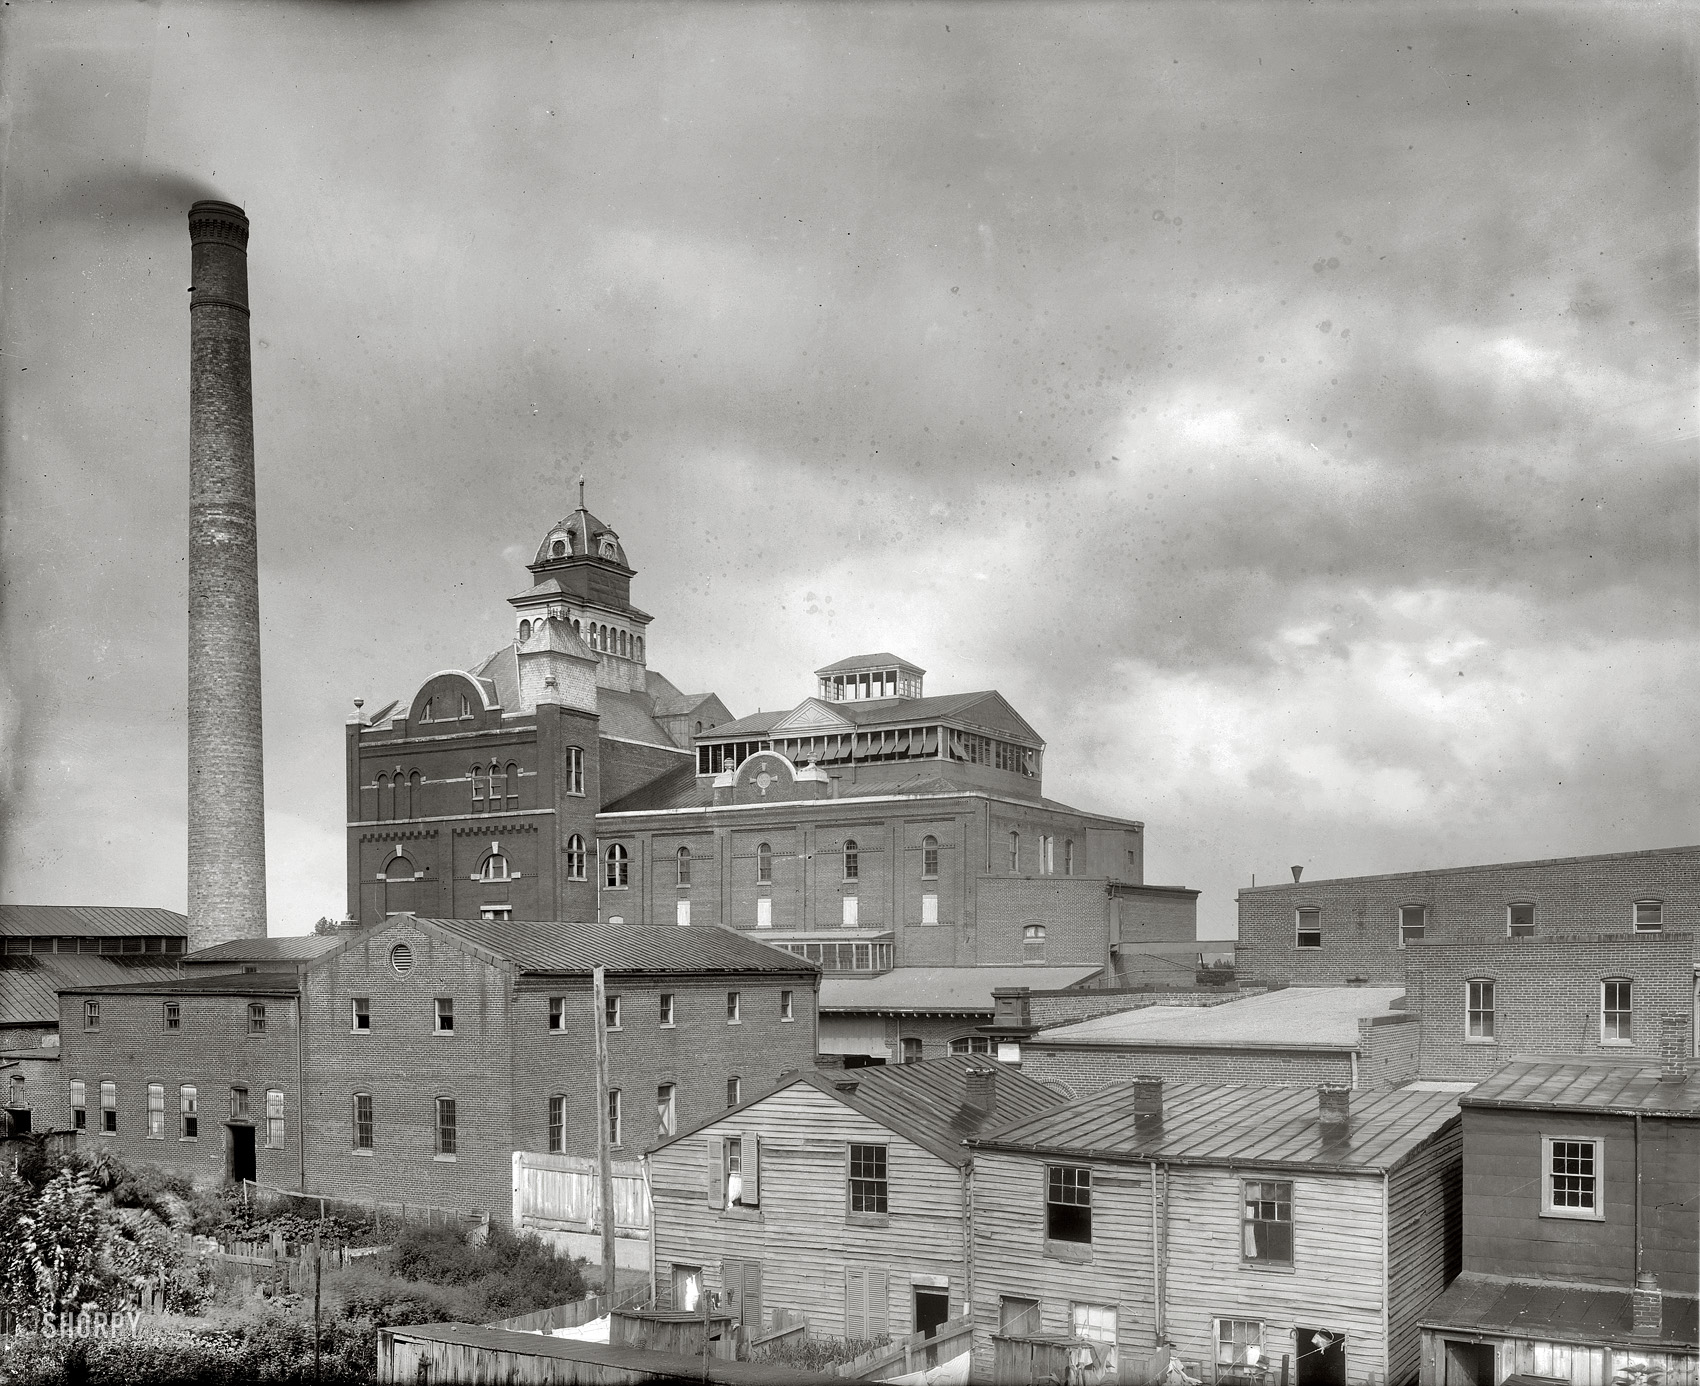 Washington, D.C., circa 1917. "National Capital Brewery." The National Capital Brewing Co. plant at 14th and D Streets S.E. The company, which owned a number bars in downtown Washington, switched to making Carry's Ice Cream with the onset of Prohibition. The brewery's boiler room furnace figured in a sensational murder case in 1912. National Photo Company glass negative. View full size.